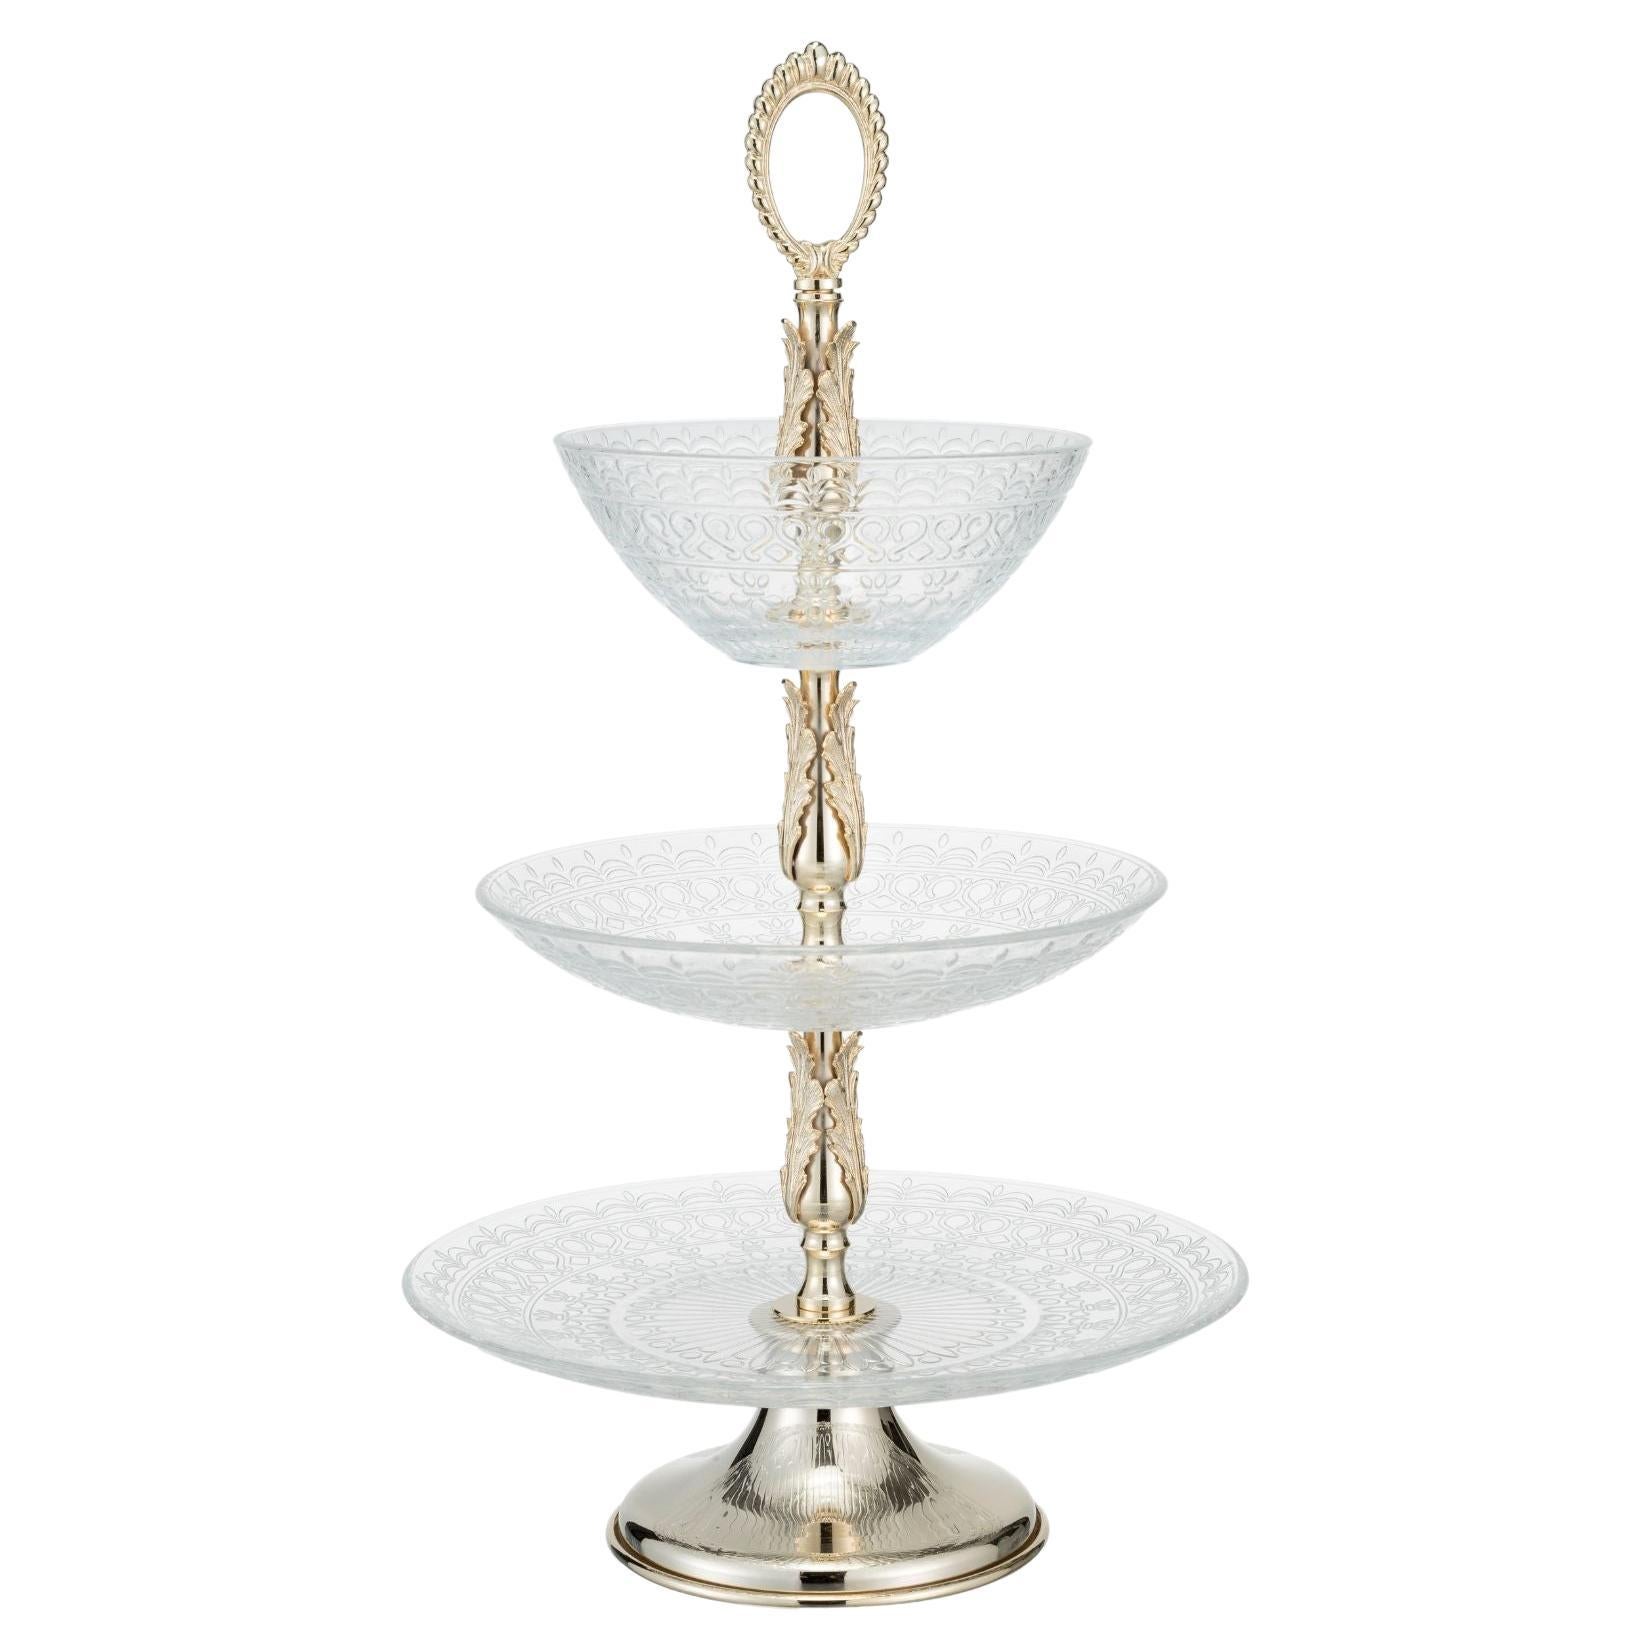 Alice three-tiered brass and glass riser